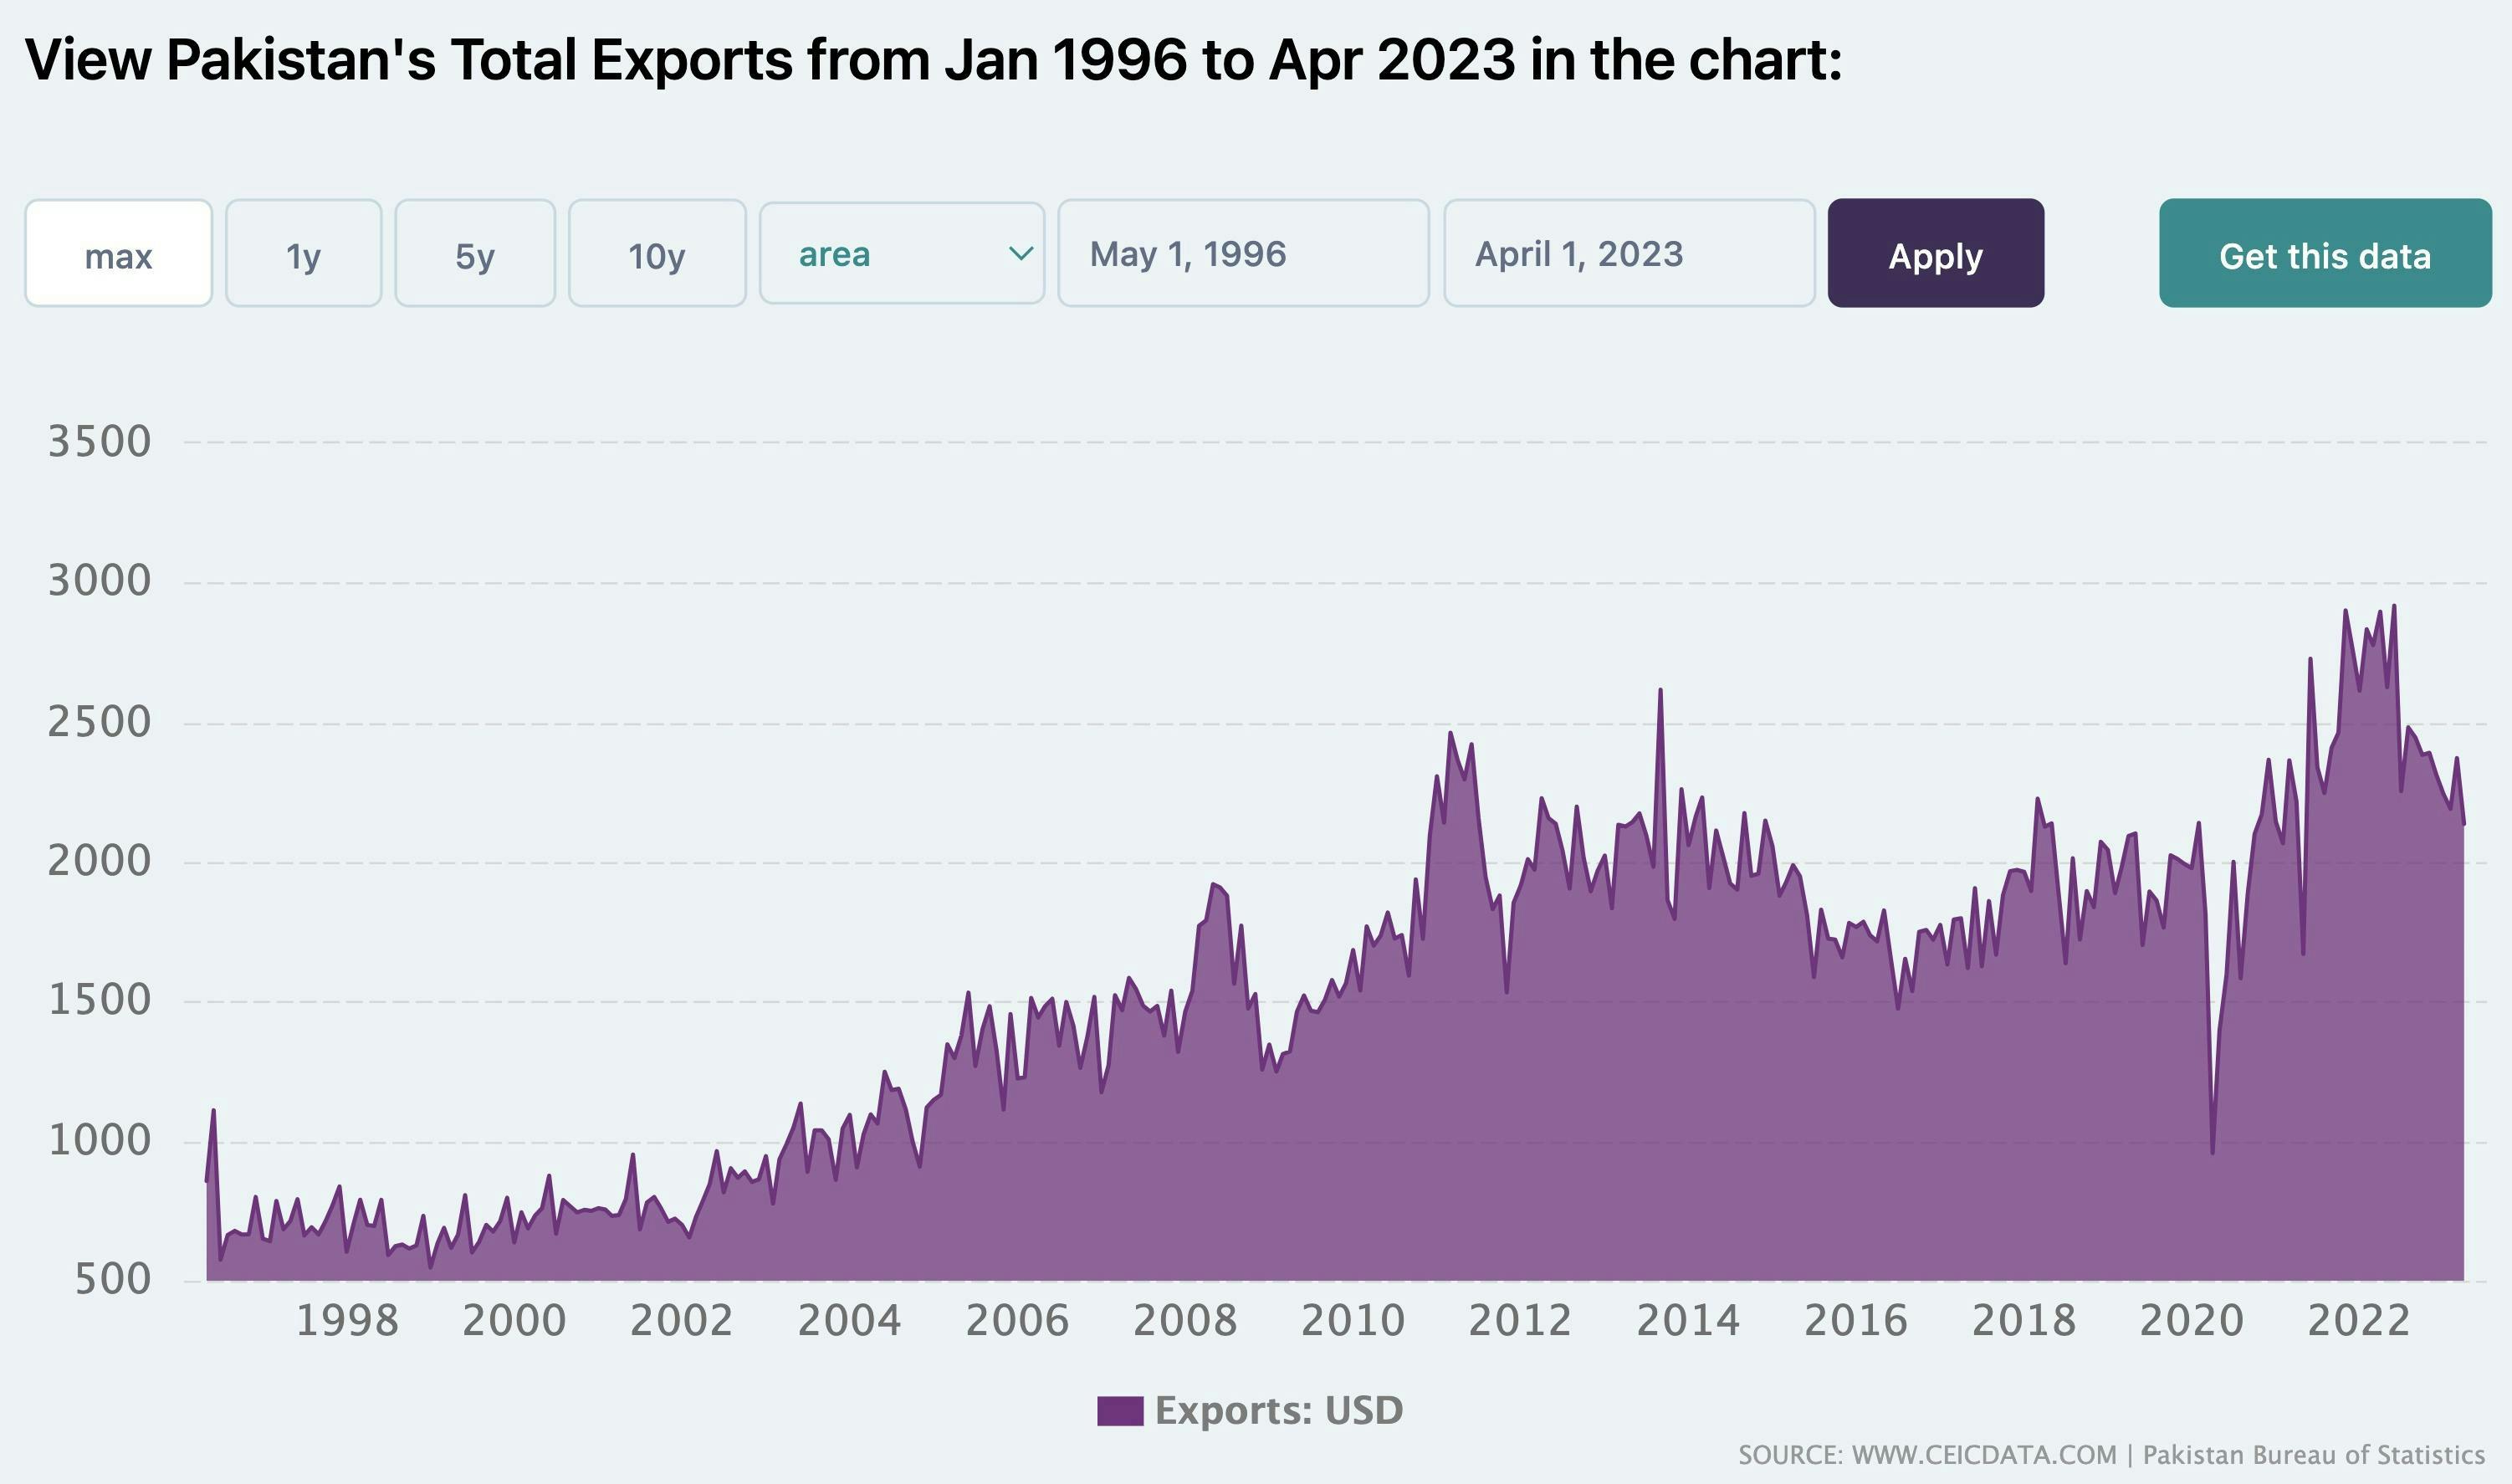 Check out which were the best years for Pakistani exports, and which were the worst